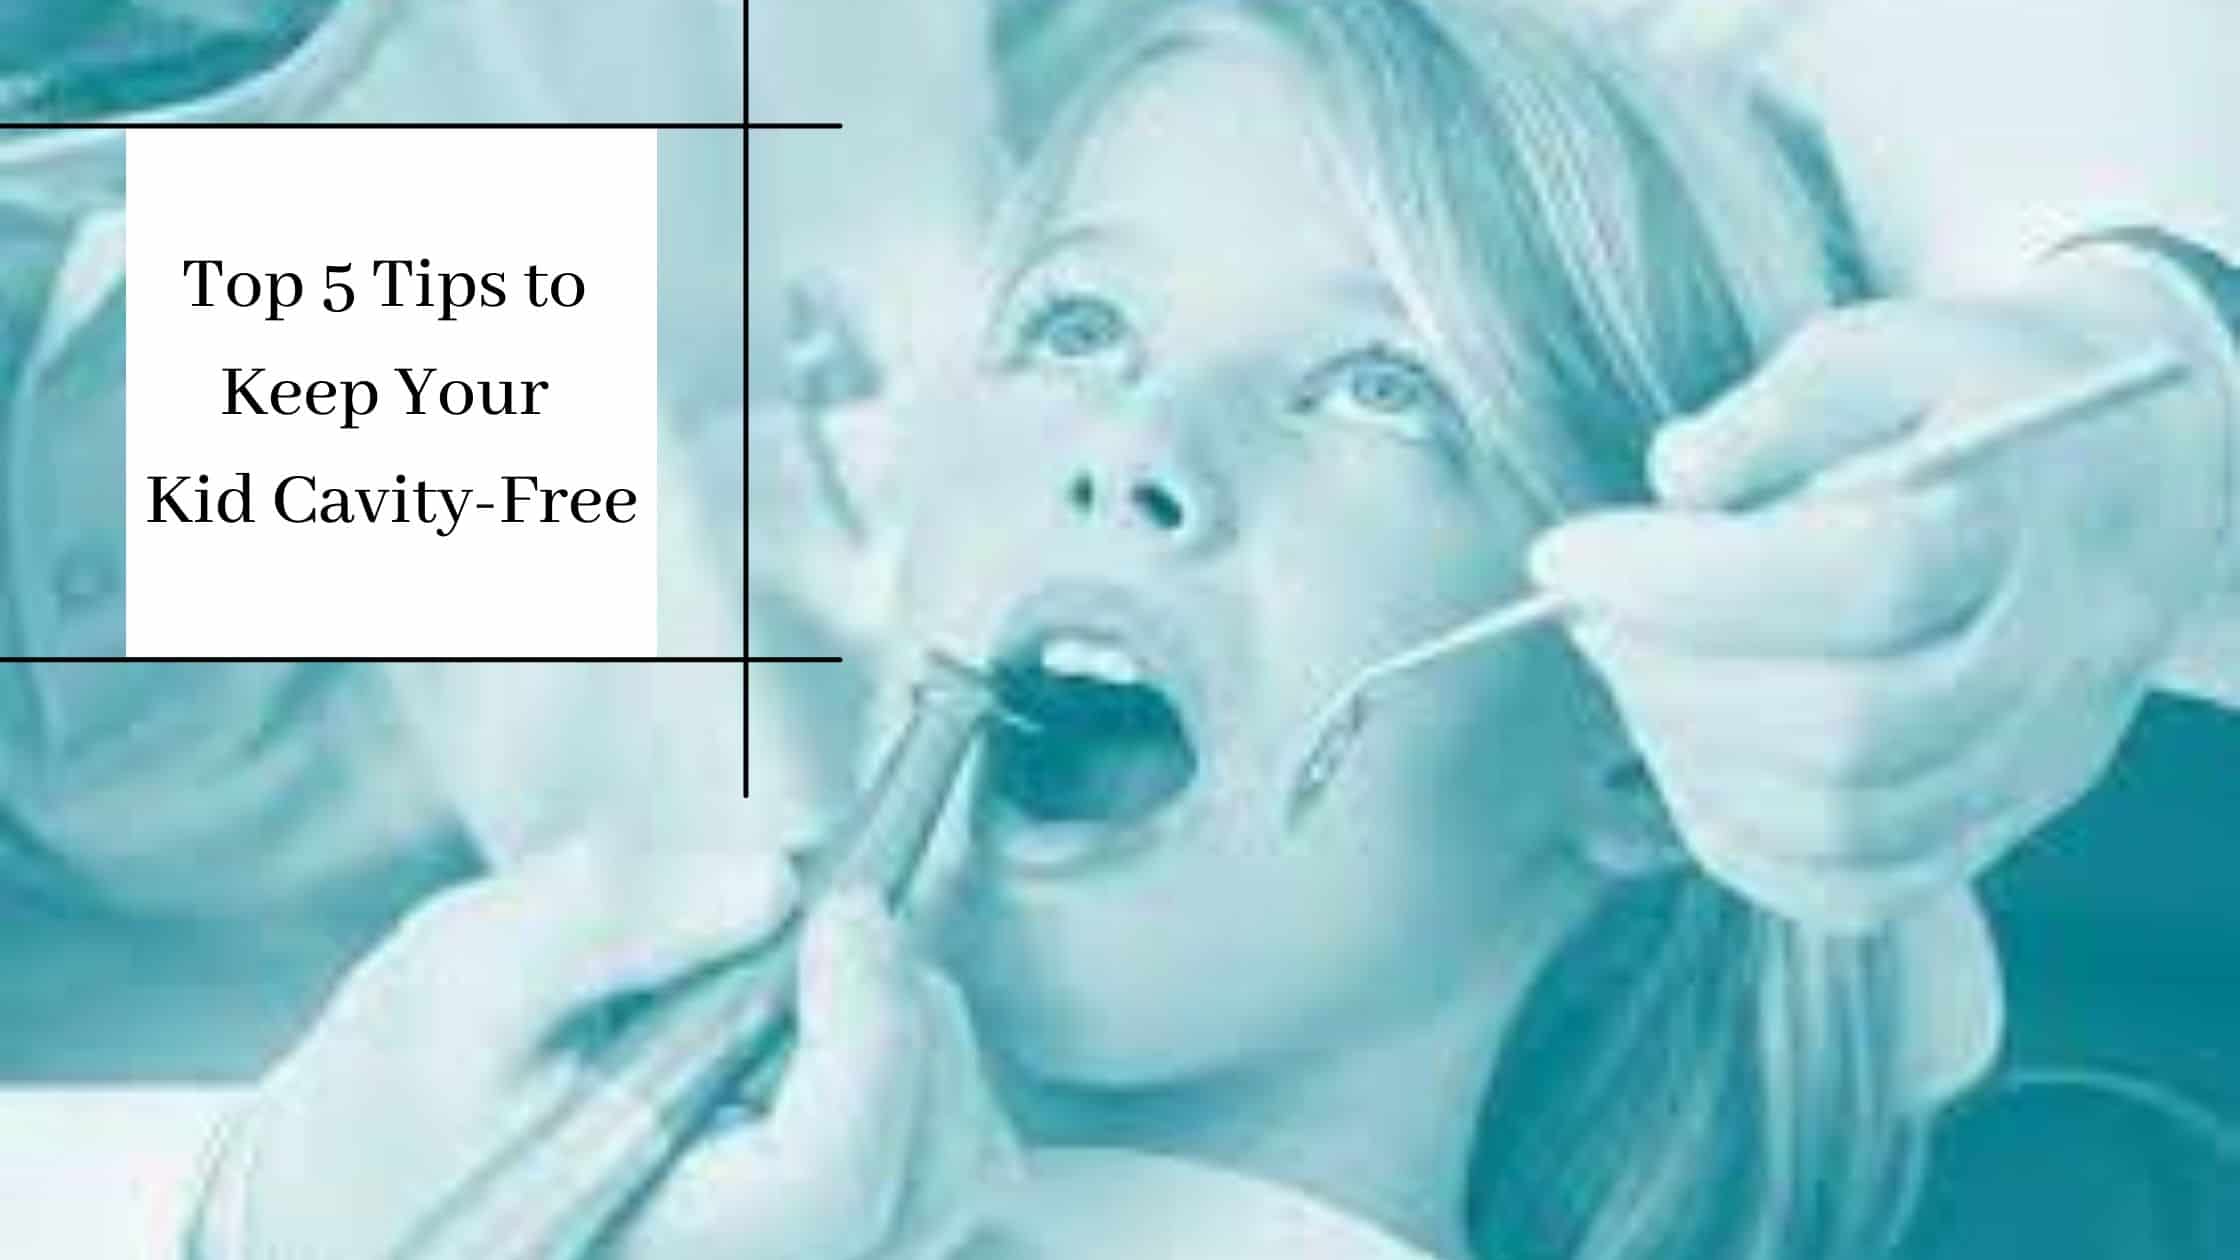 Top 5 Tips to Keep Your Kid Cavity-Free